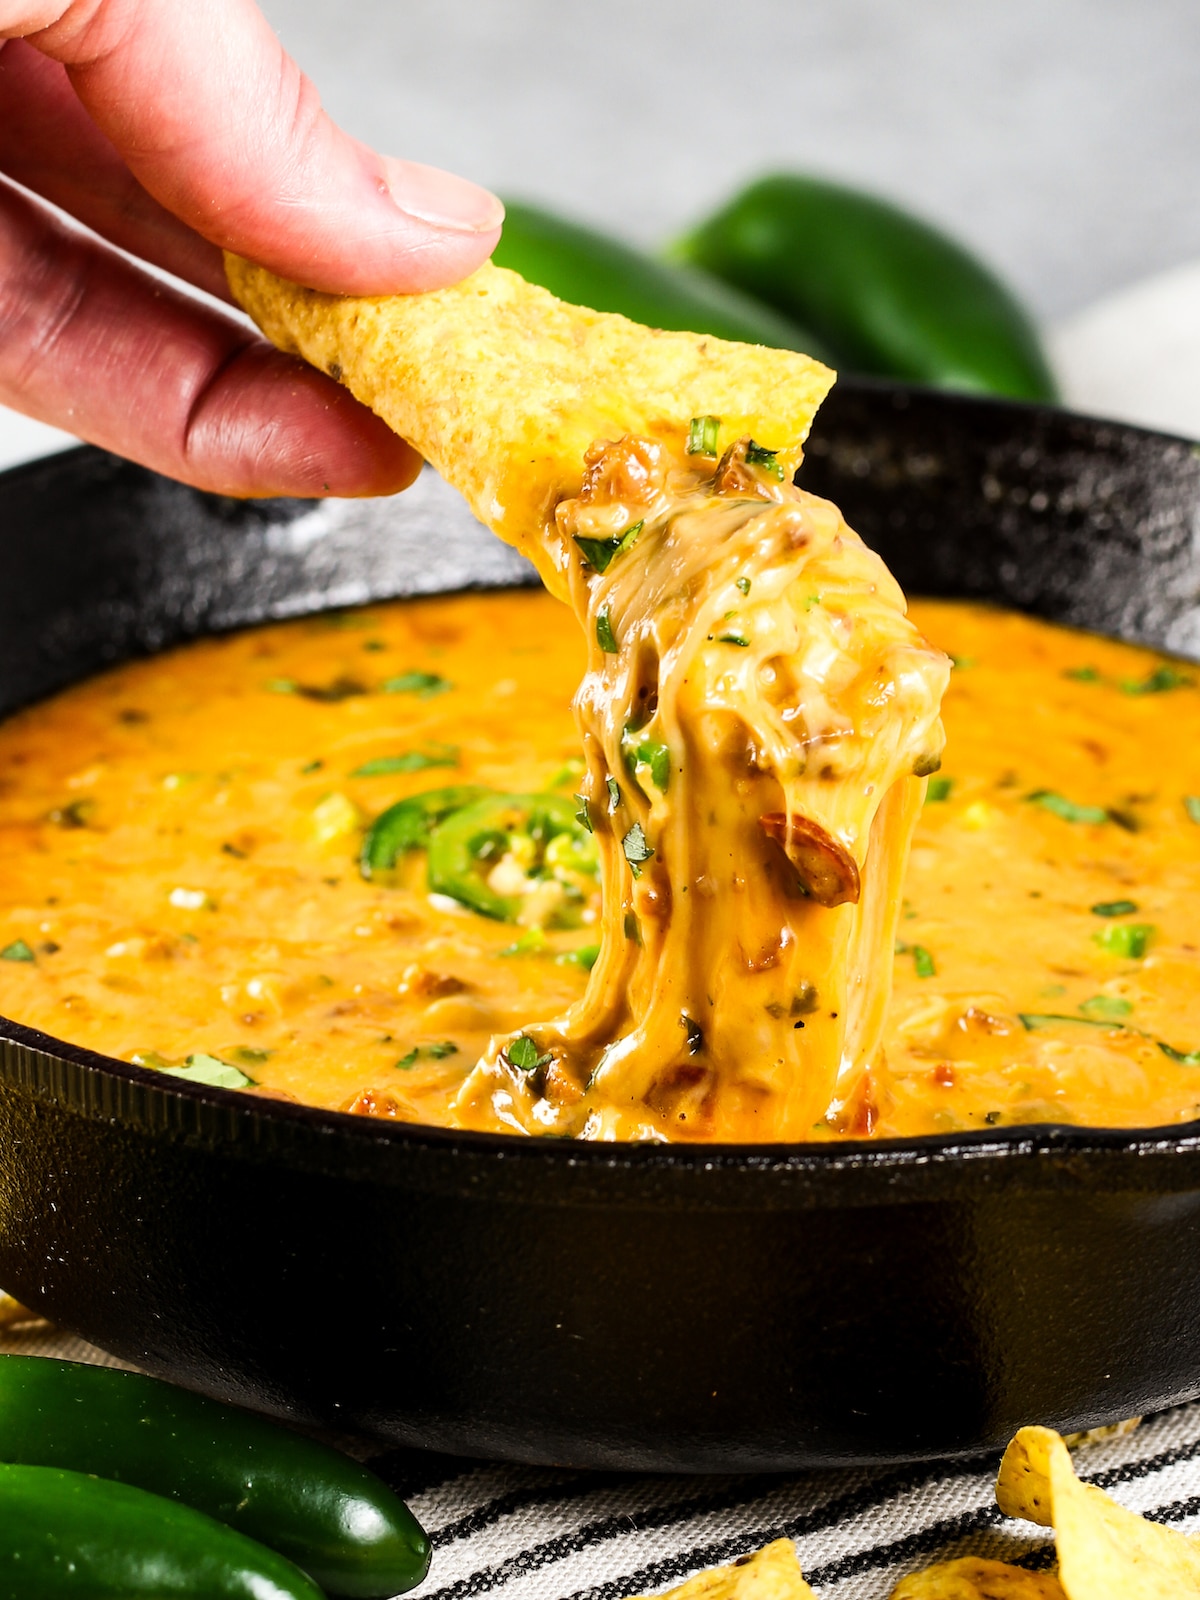 A Closeup photo of a chip being dipped into a skillet of Queso Fundido.